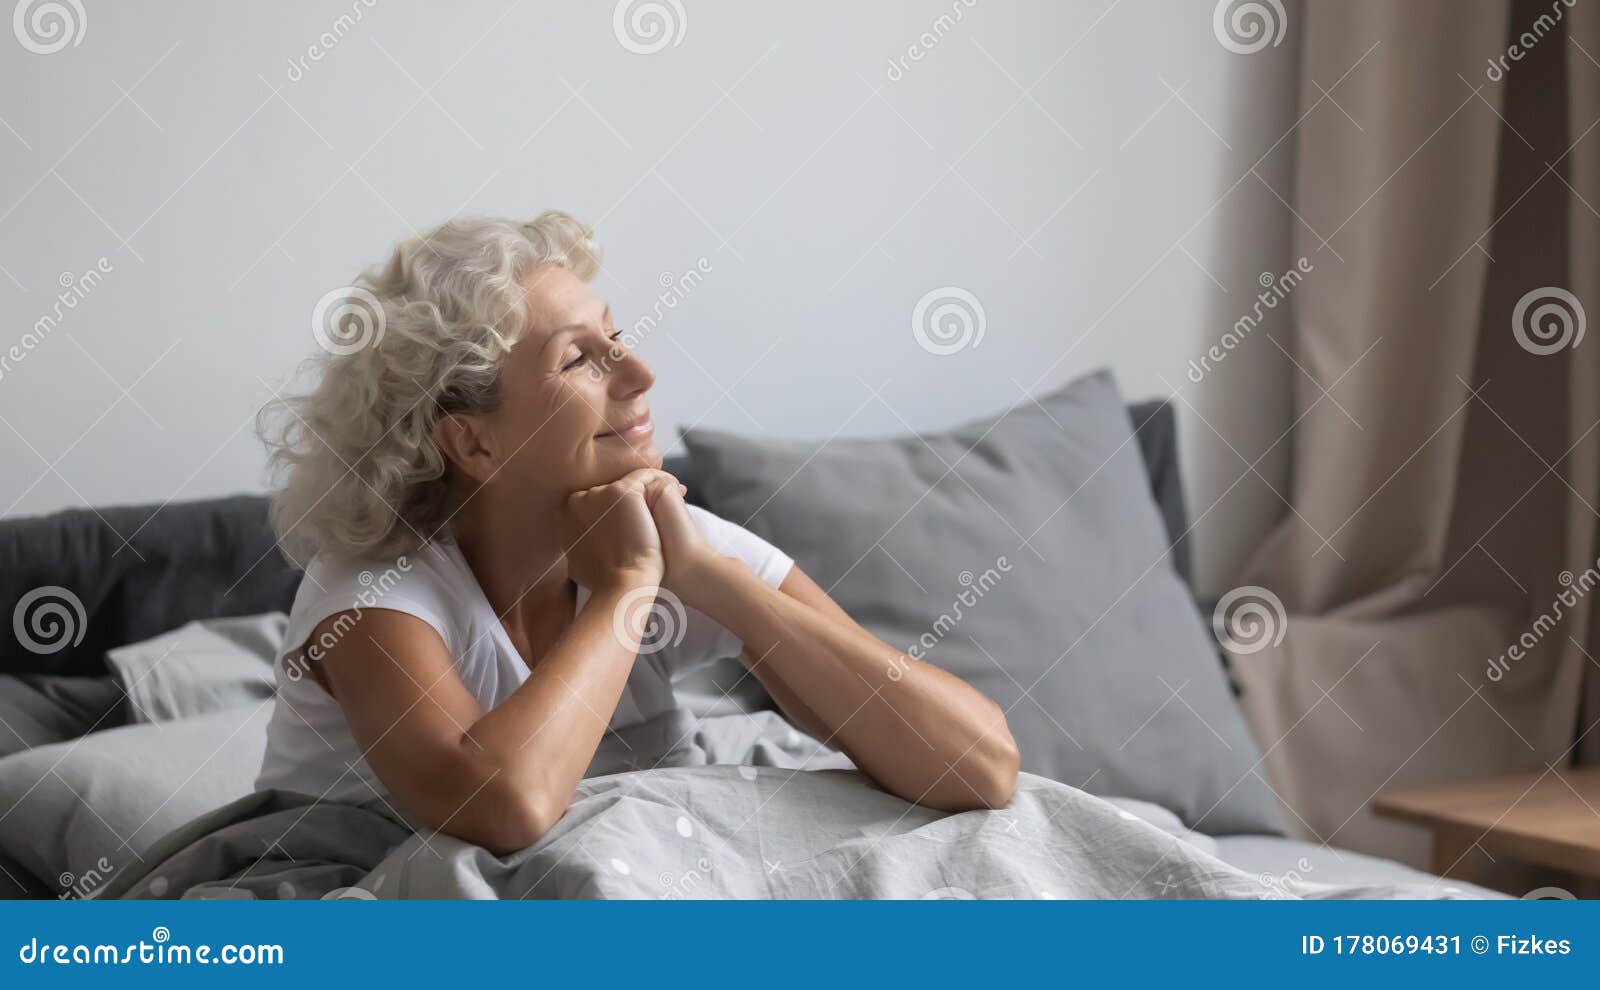 peaceful middle aged woman welcoming new day in bedroom.